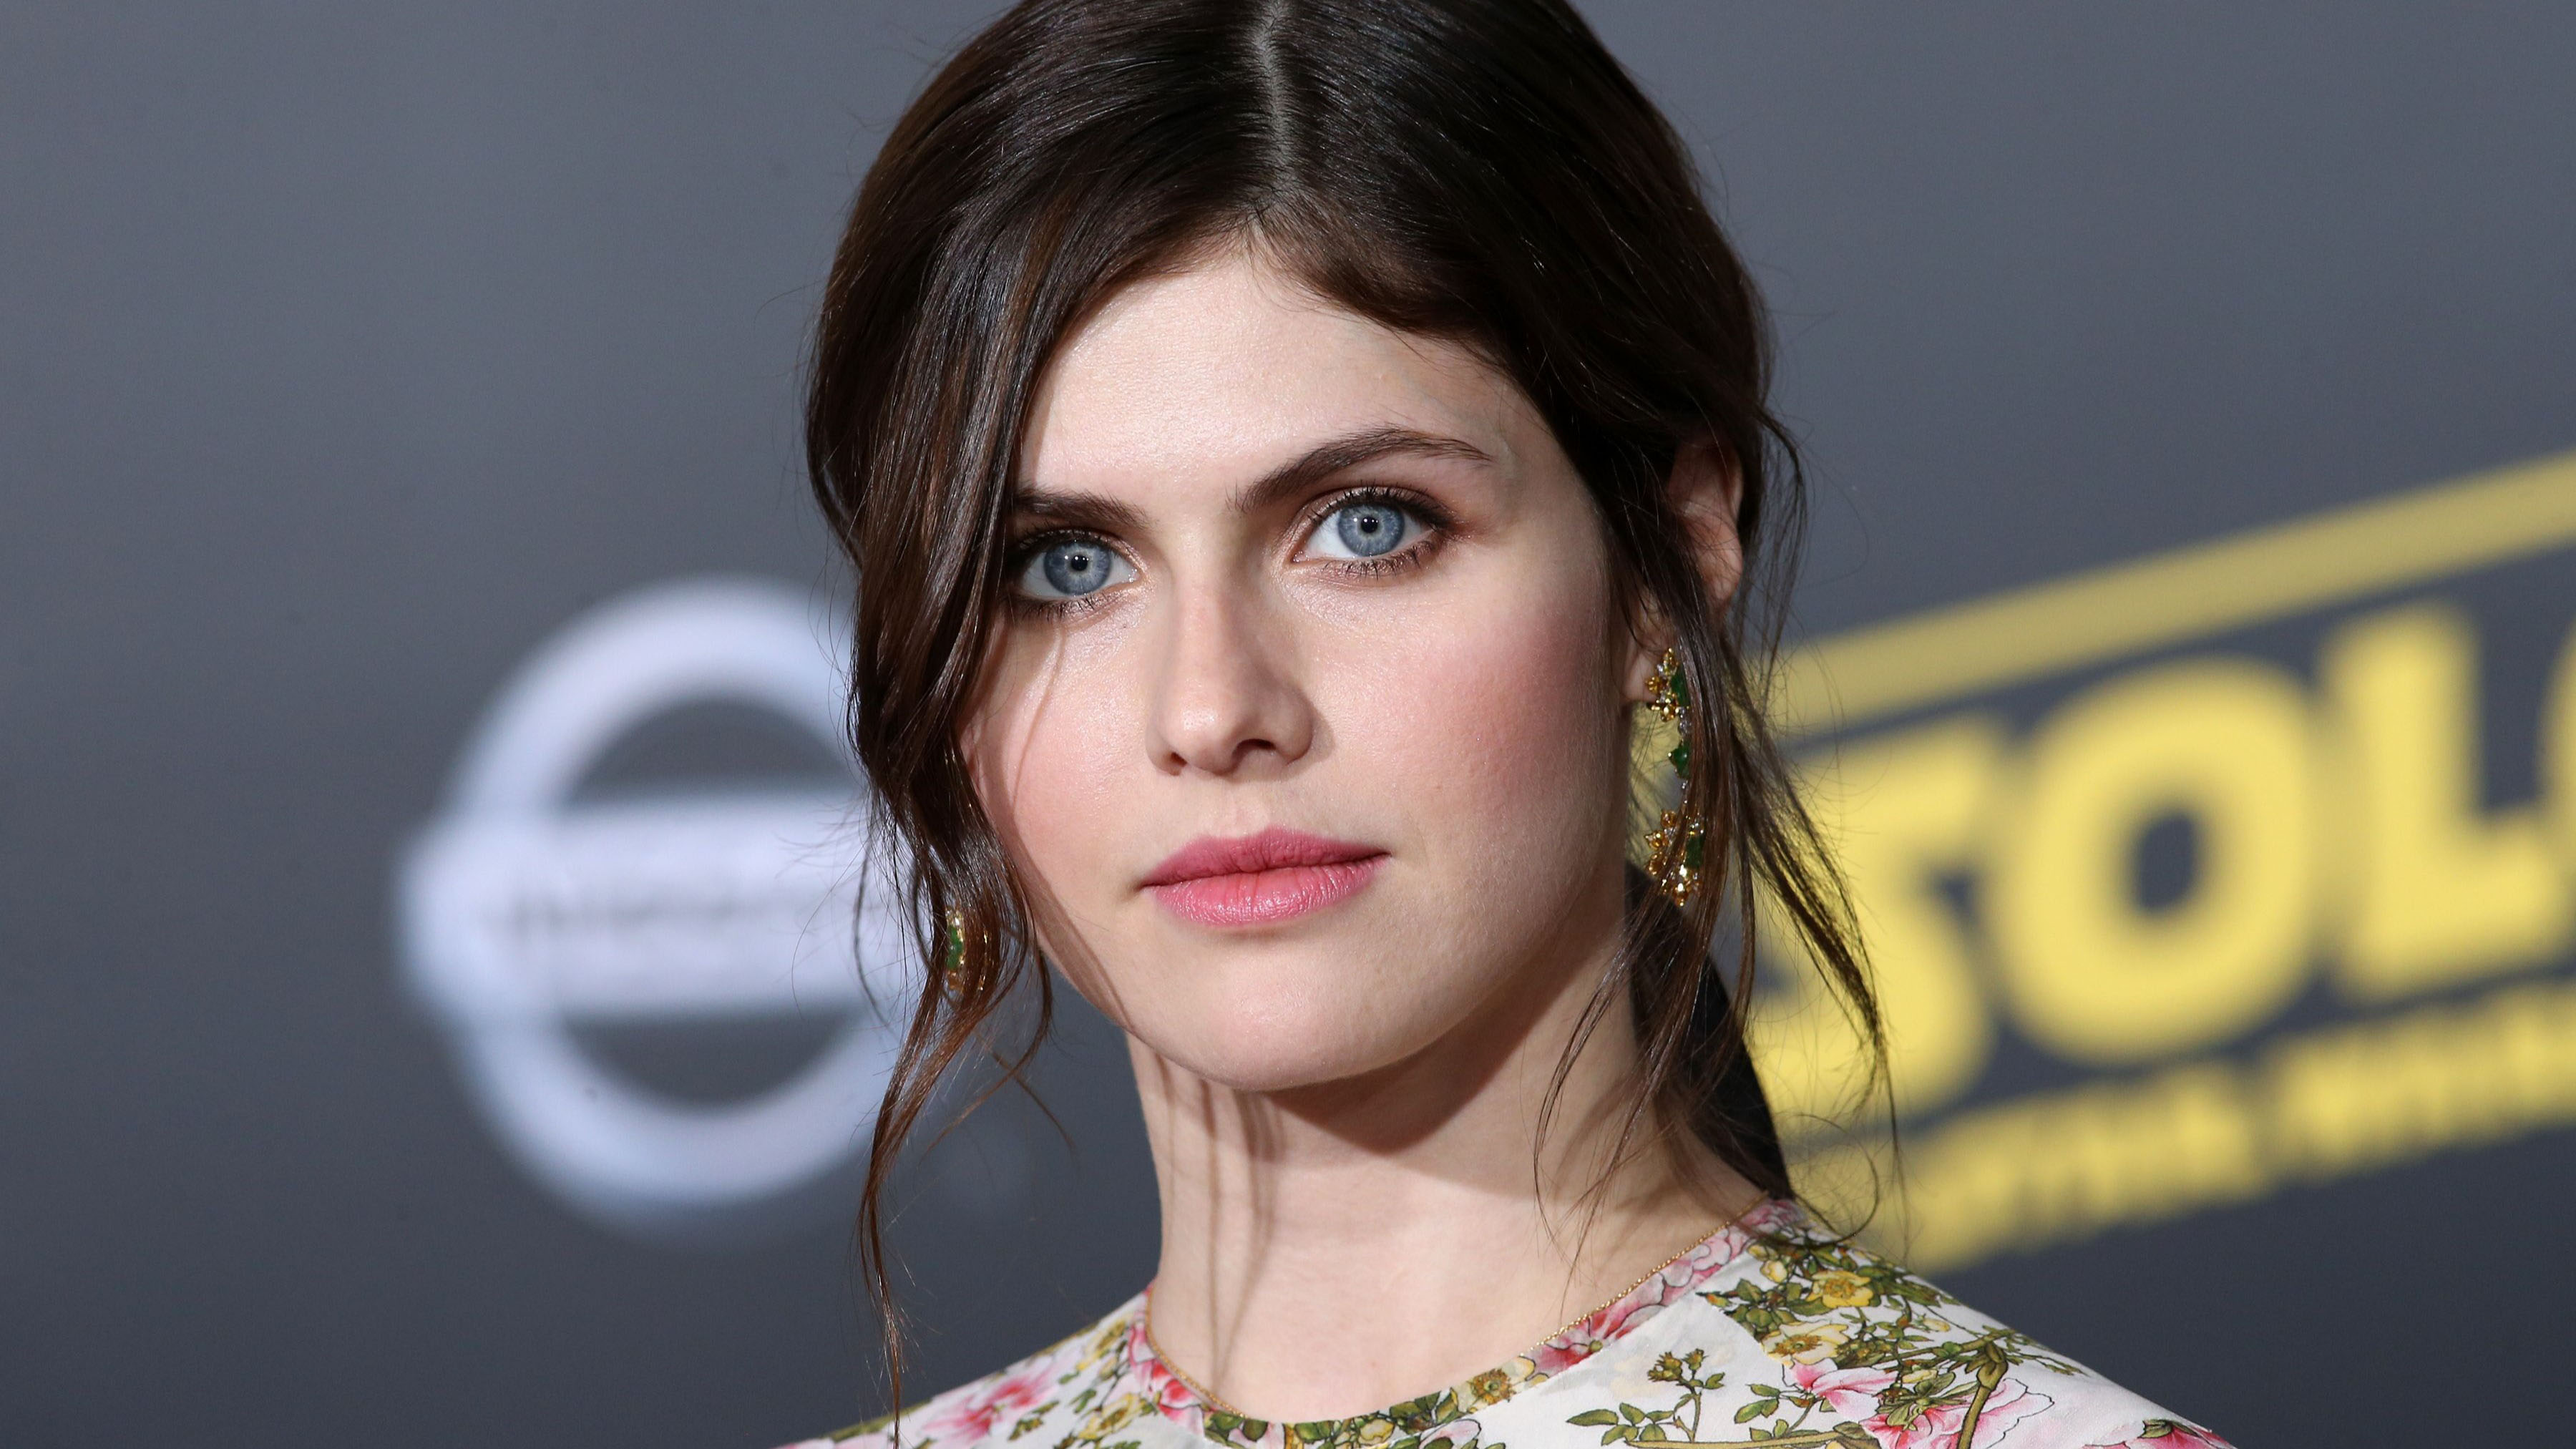 Alexandra Anna Daddario (born March 16, 1986) is an American actress. She had her breakthrough portraying Annabeth Chase in the Percy Jackson film ser...